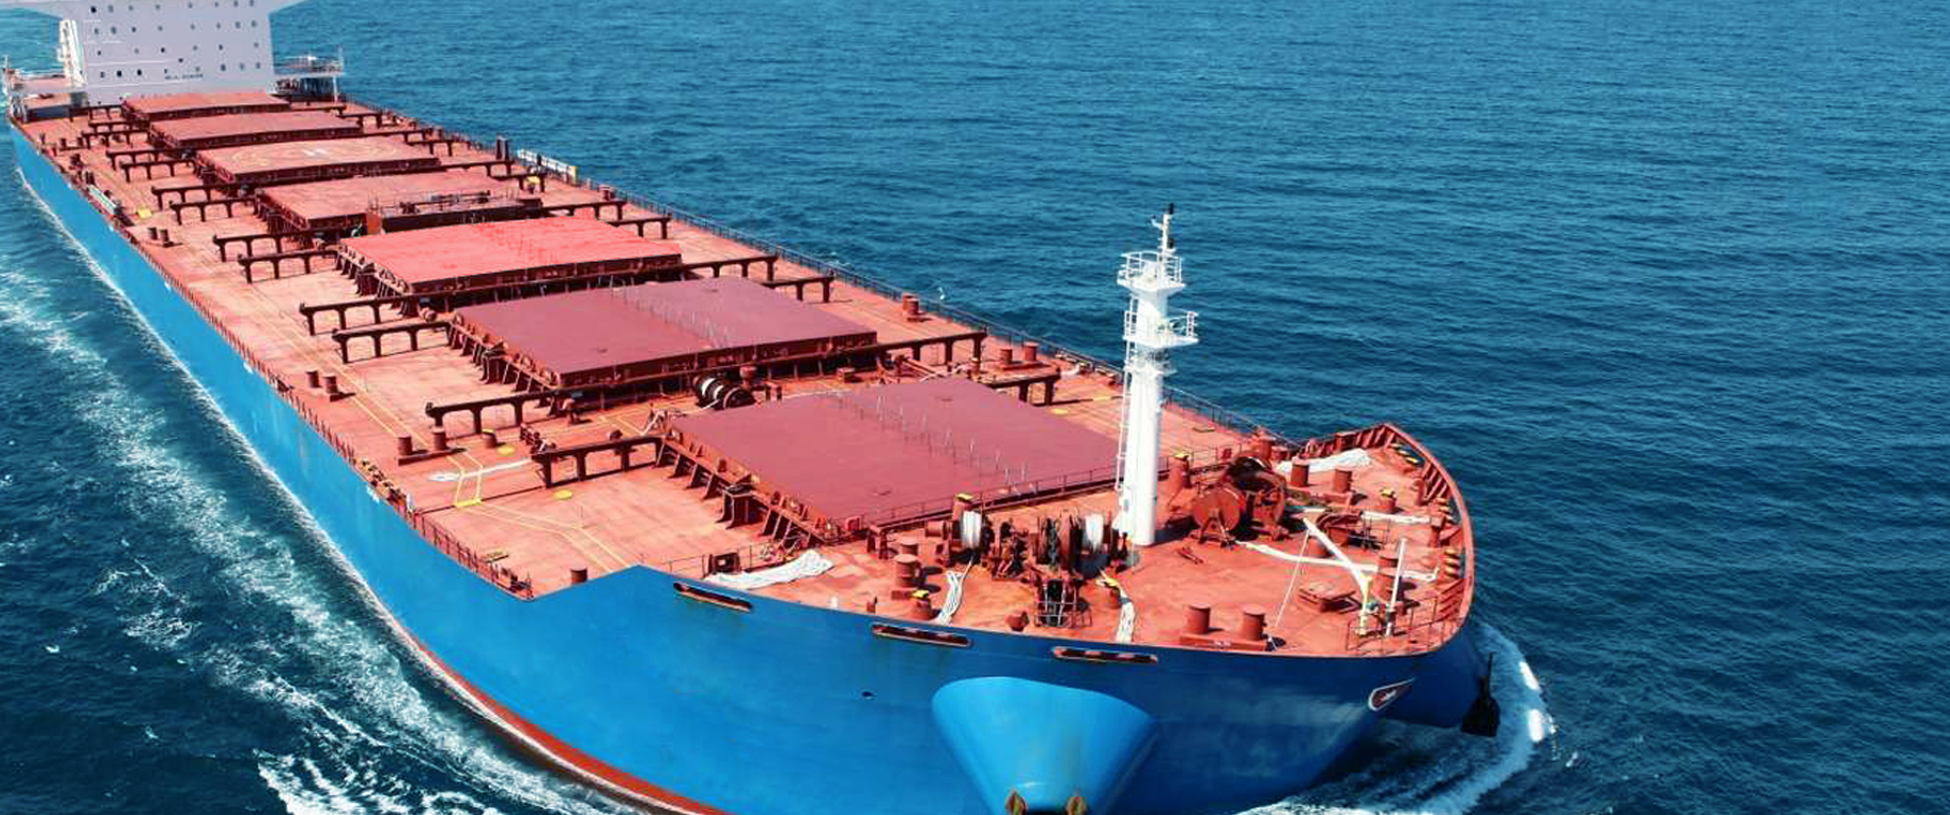 Stream Ships, Stream Ships in egypt, Stream Ships Service, Stream Ships Service in egypt, Stream Ship Port call planning, steamship shipping in egypt, Steam Ship Protection Agency, Steam Ship Offshore Services